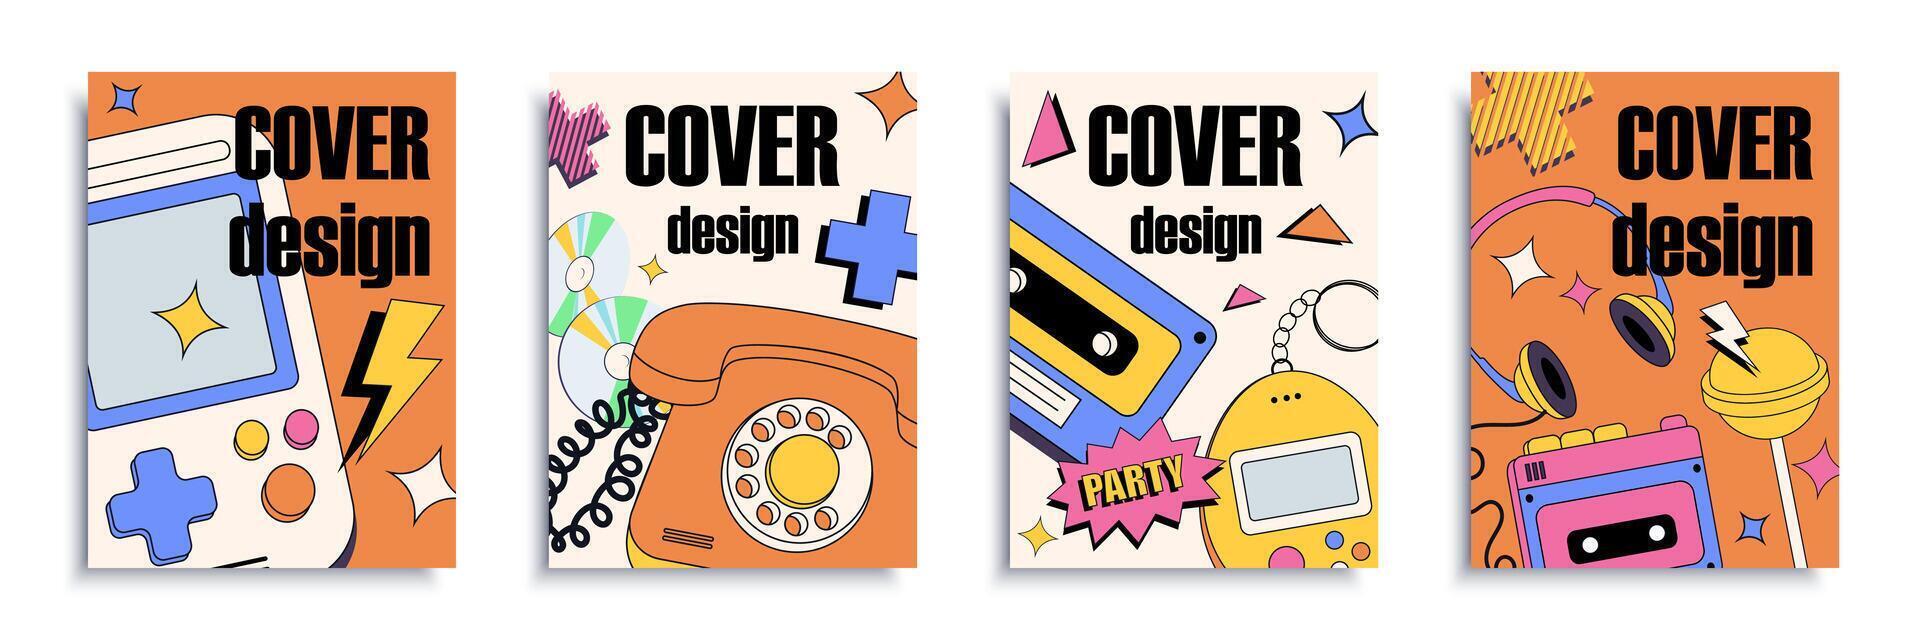 90s retro cover brochure set in flat design. Poster templates with old gamepads, music cassettes and disks, game gadgets, headphones, lollipops, nostalgia items and elements. Vector illustration.